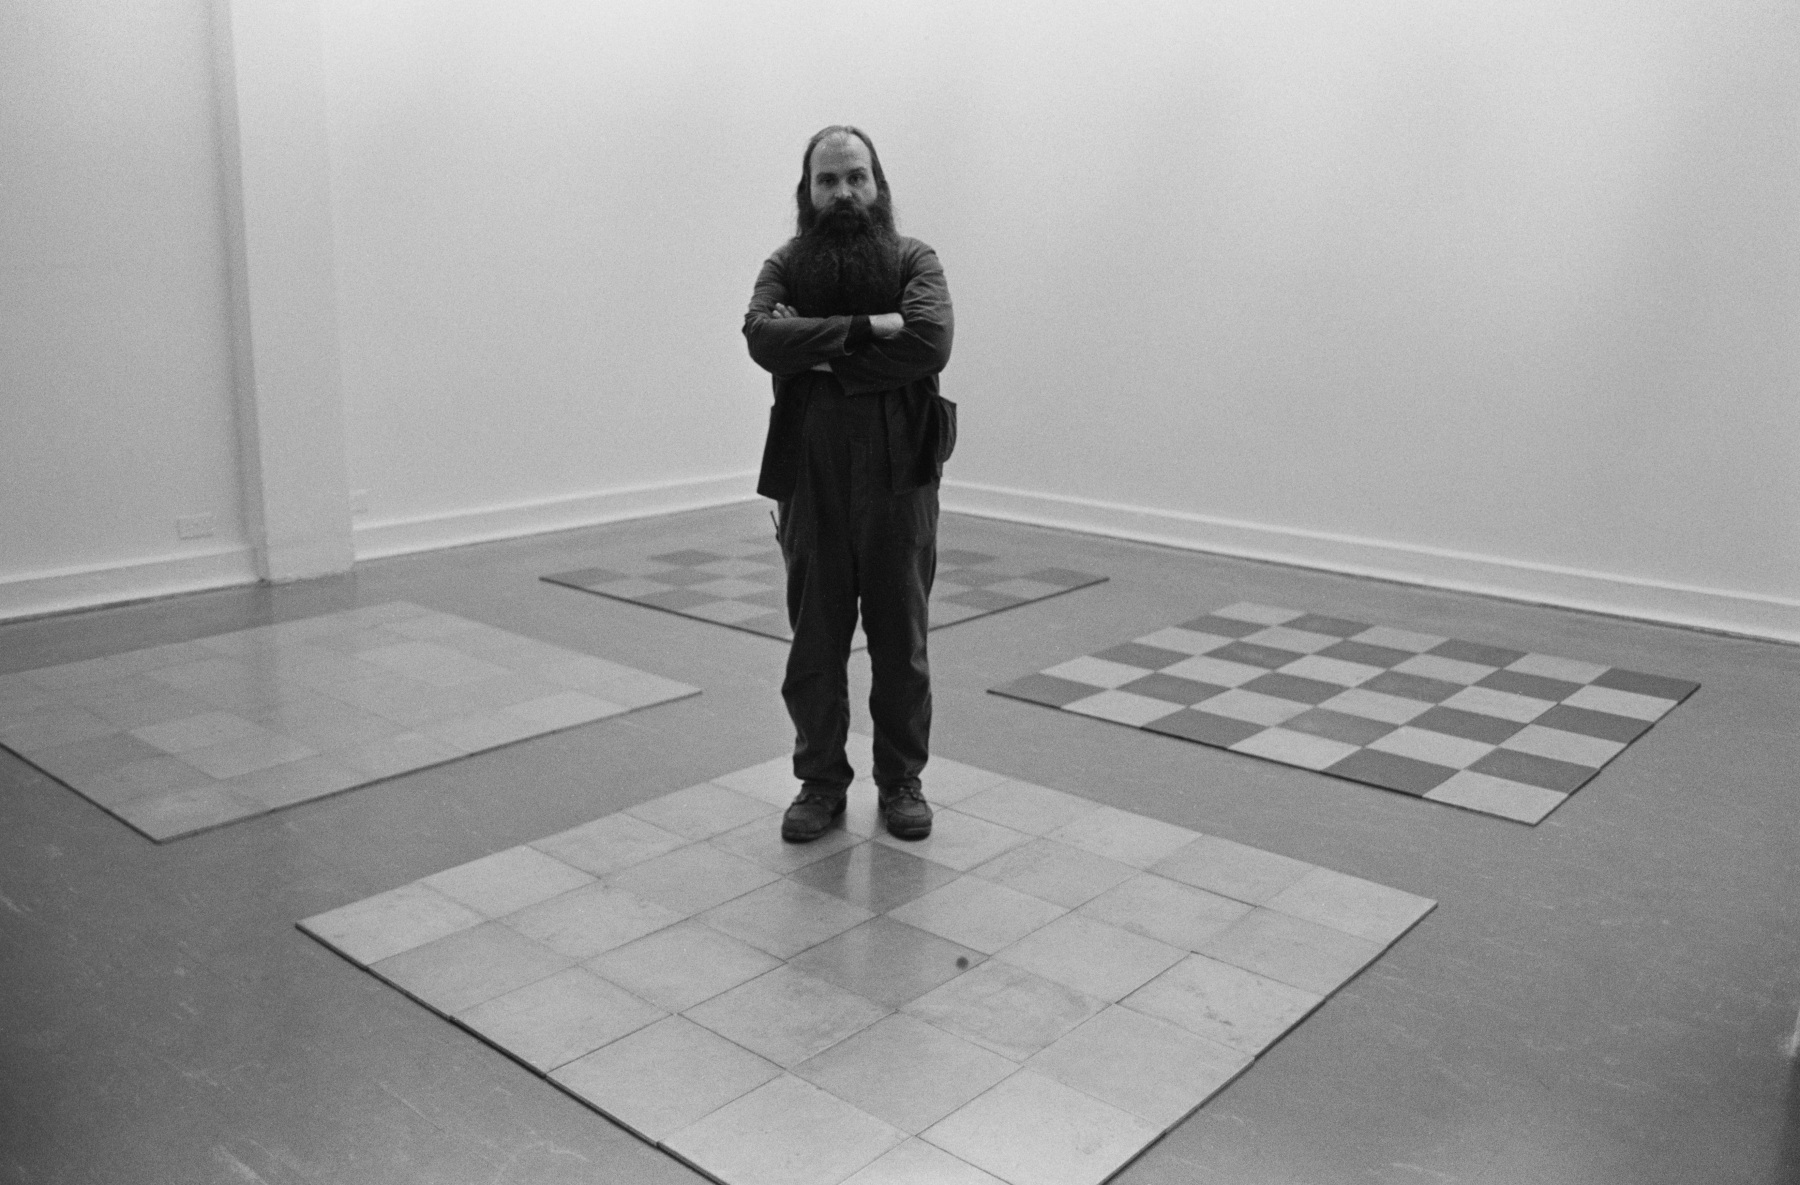 Carl Andre at the Whitechapel Gallery, London, 1978

Photo by United News / Popperfoto via Getty Images